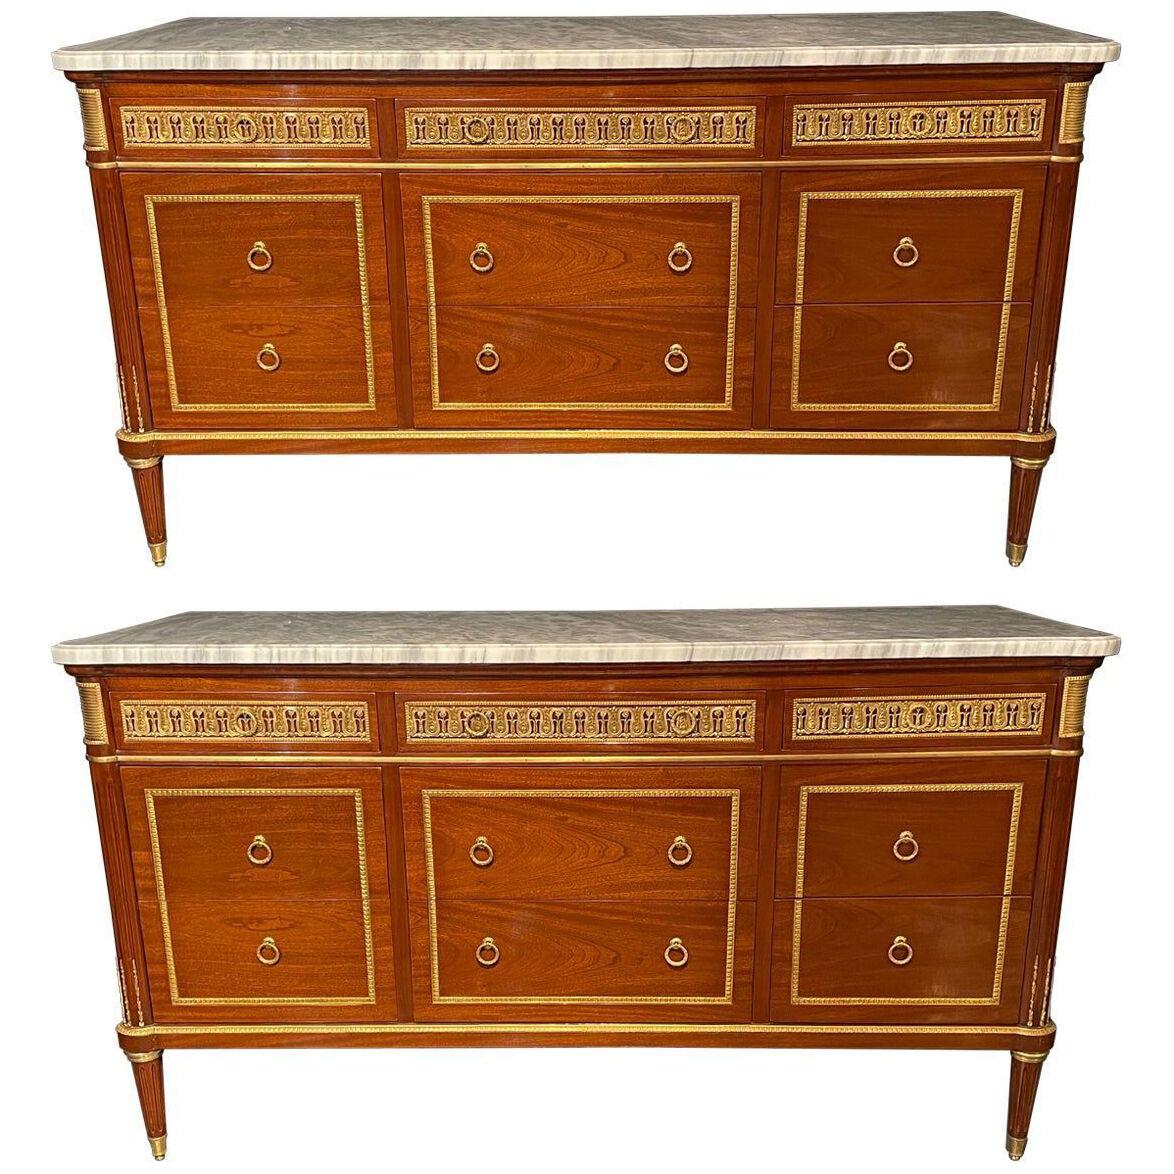 Pair of Monumental French Commodes in the Manner of Maison Jansen